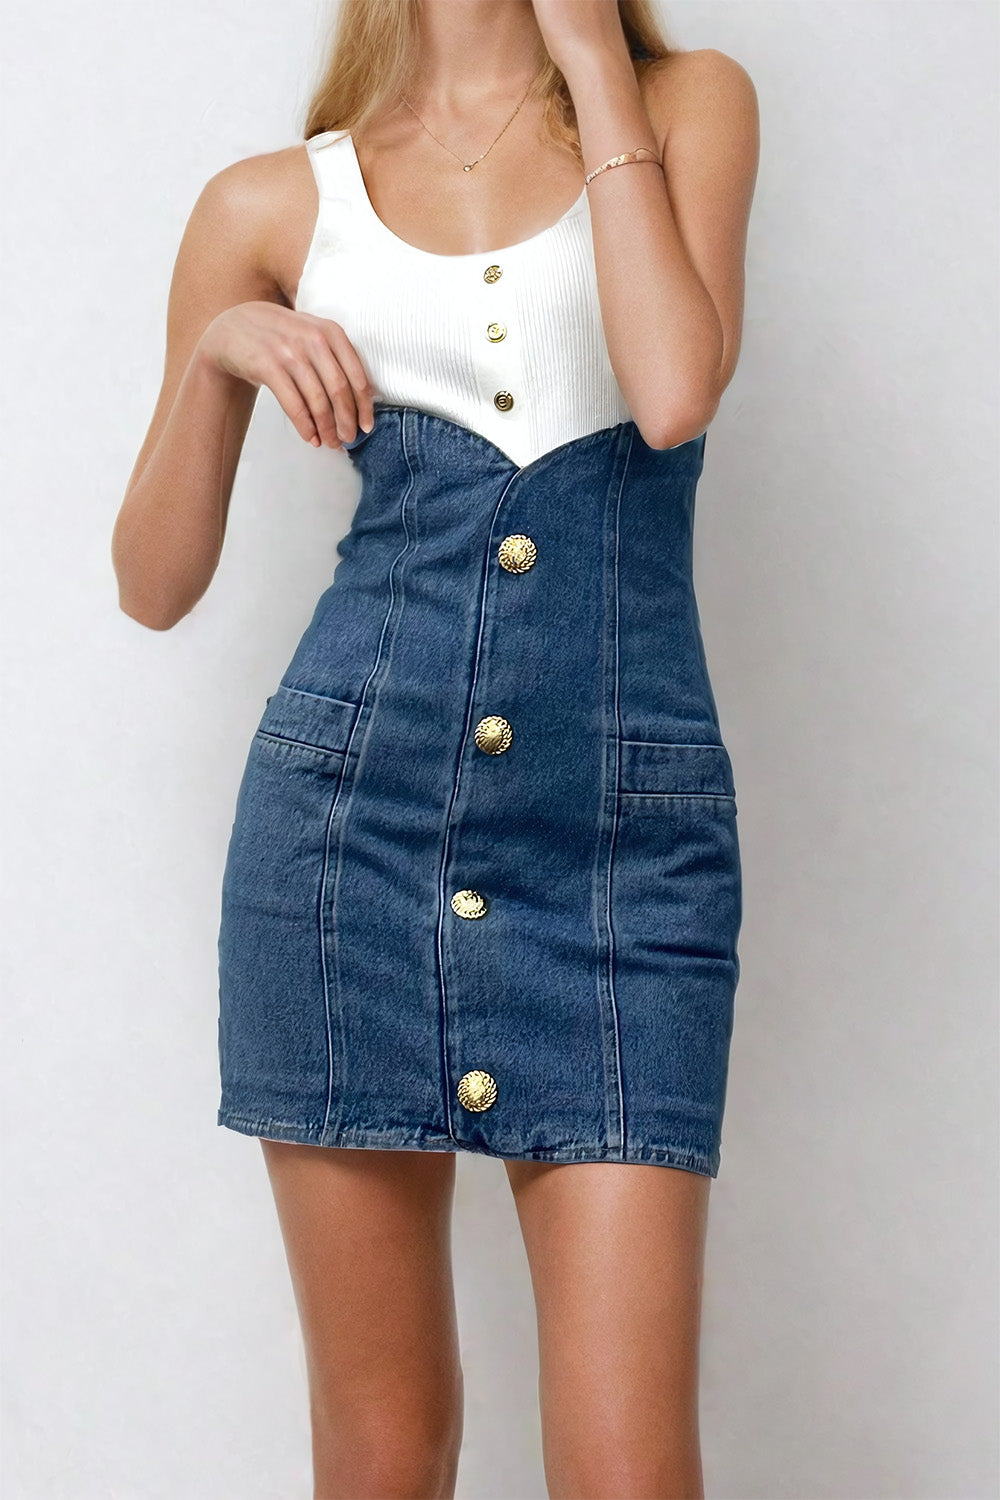 High Waist Mini Skirt with Gold Accents - Blue